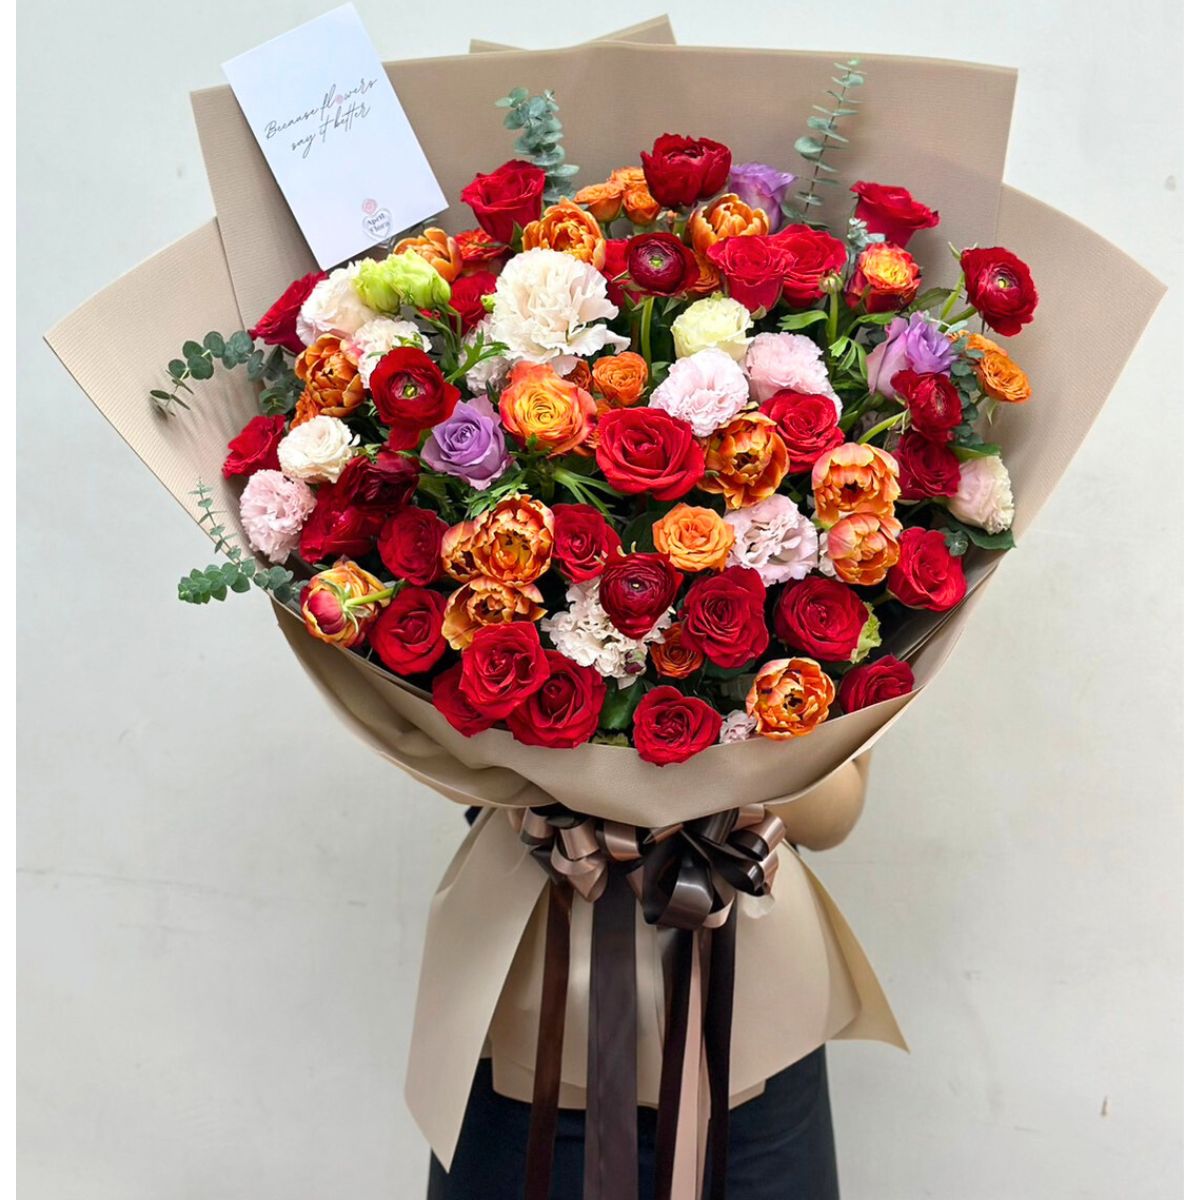 "Happiness" Bouquet